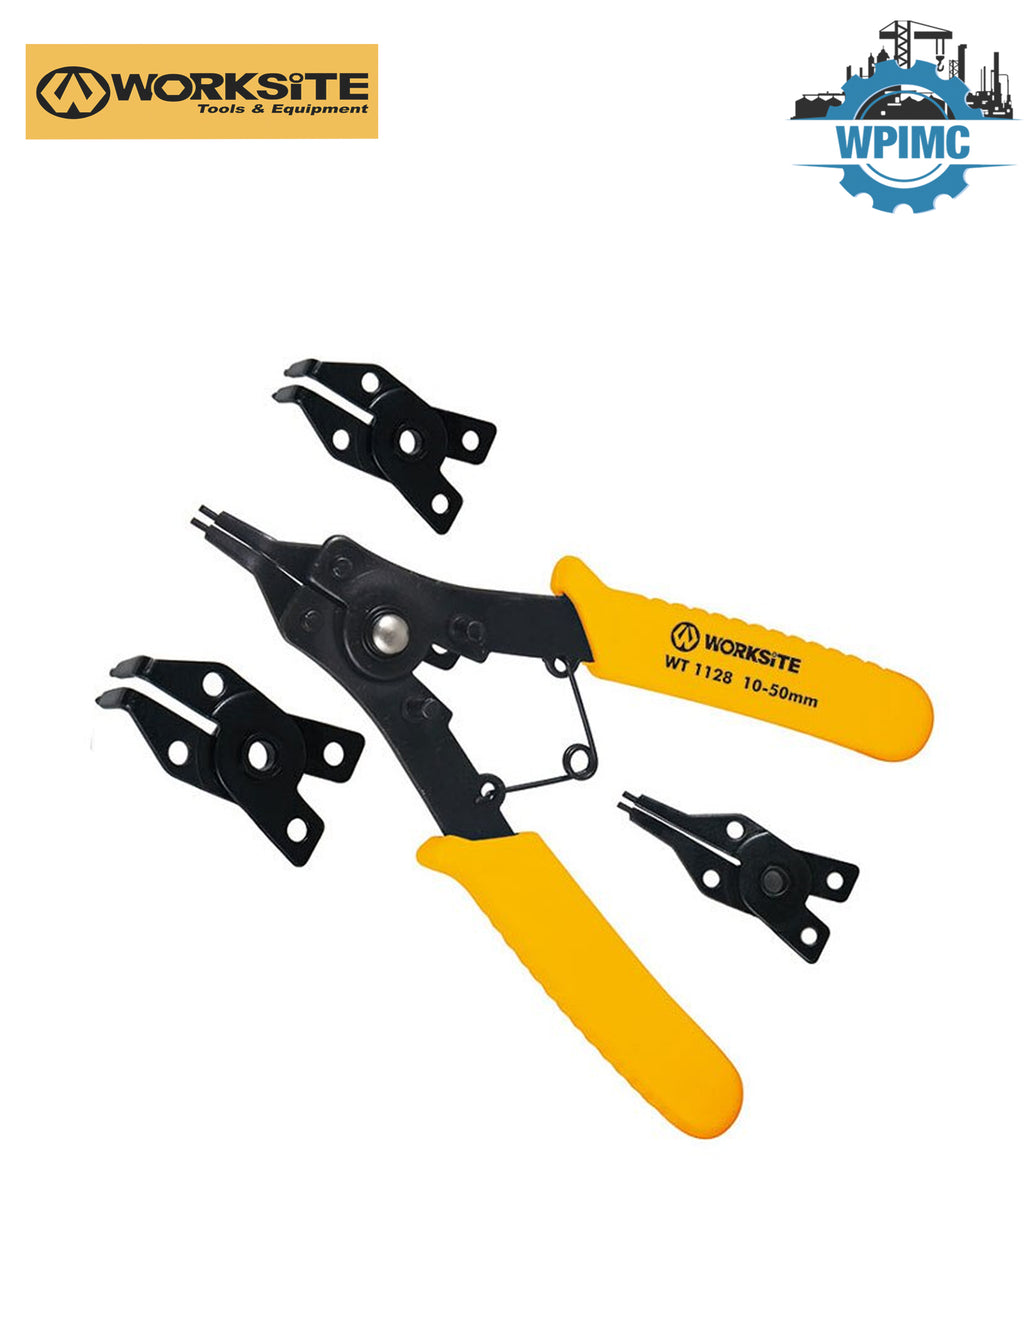 WORKSITE SNAP RING PLIER WT1128